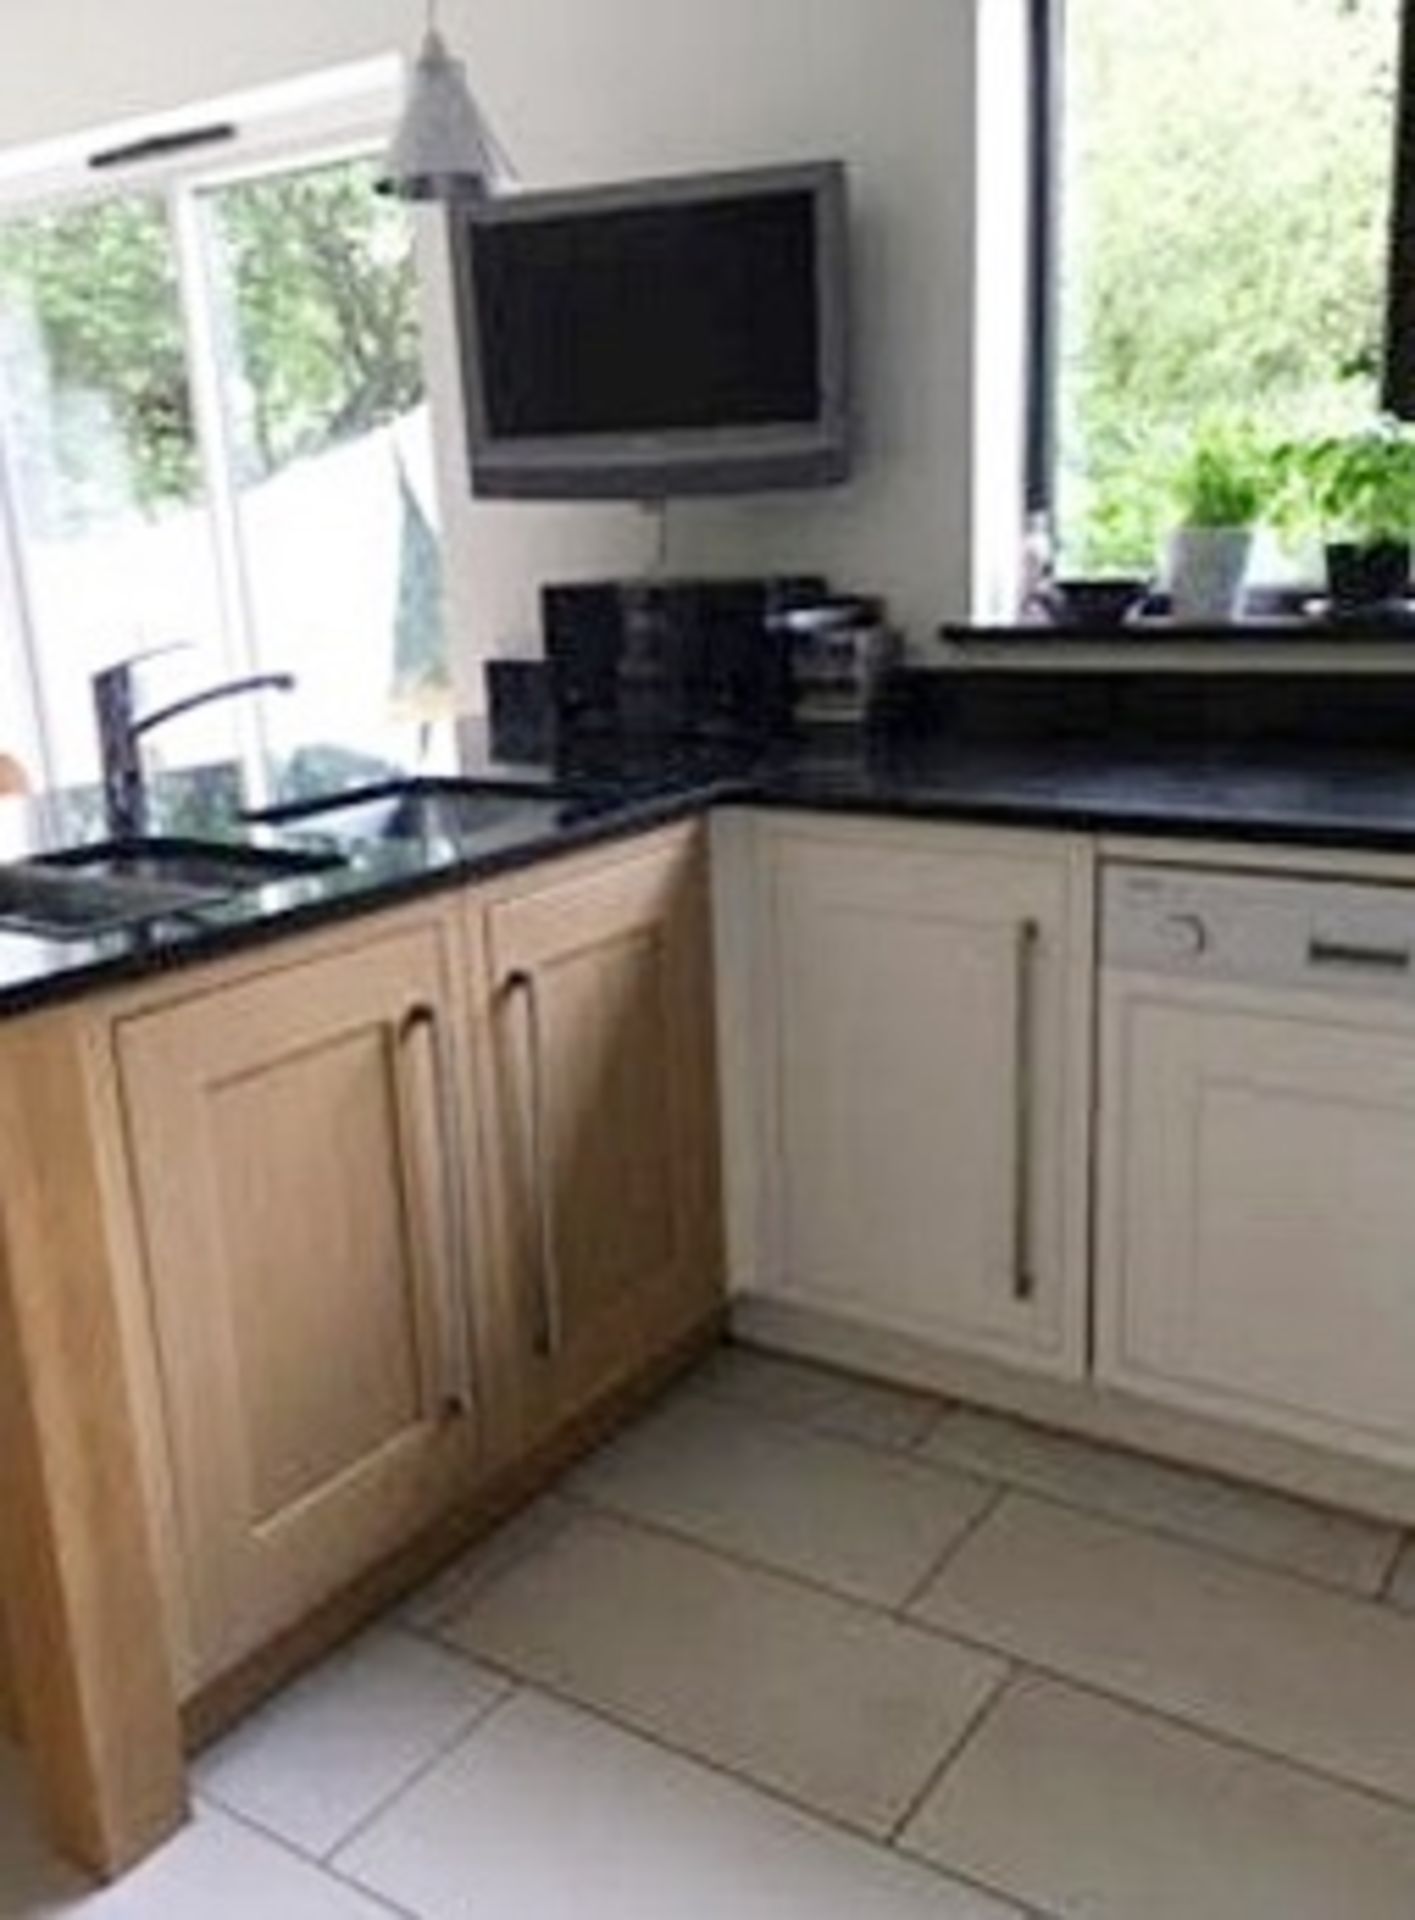 1 x Bespoke Solid Wood Fitted Kitchen With Granite Worktops - Pre-owned In Good Condtion - CL172 - - Image 2 of 22